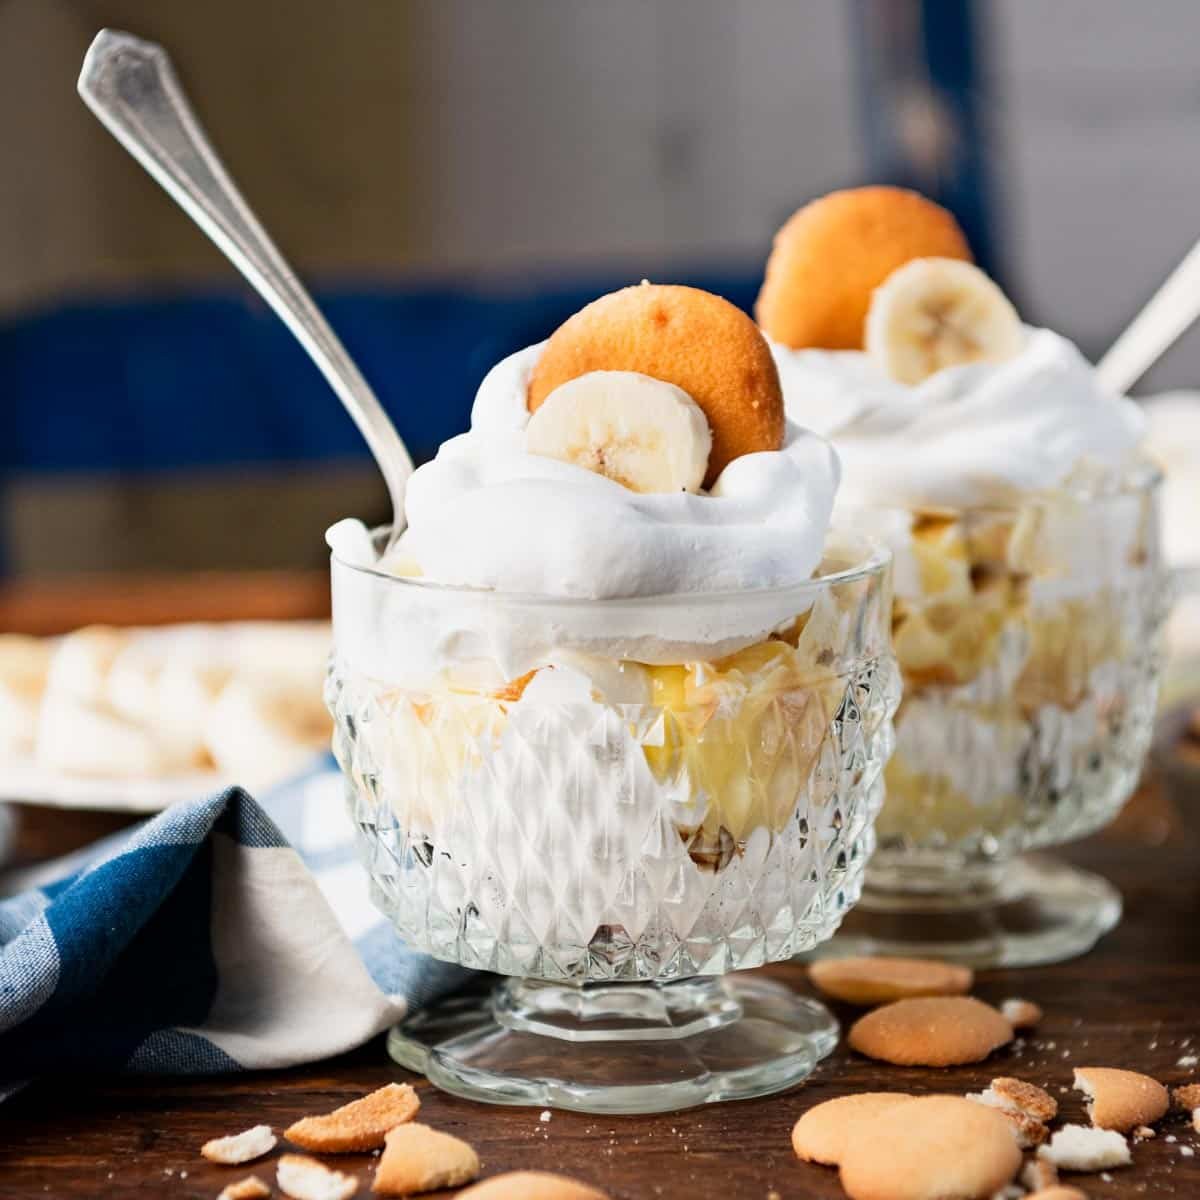 Quick and easy banana pudding recipe on a wooden table.